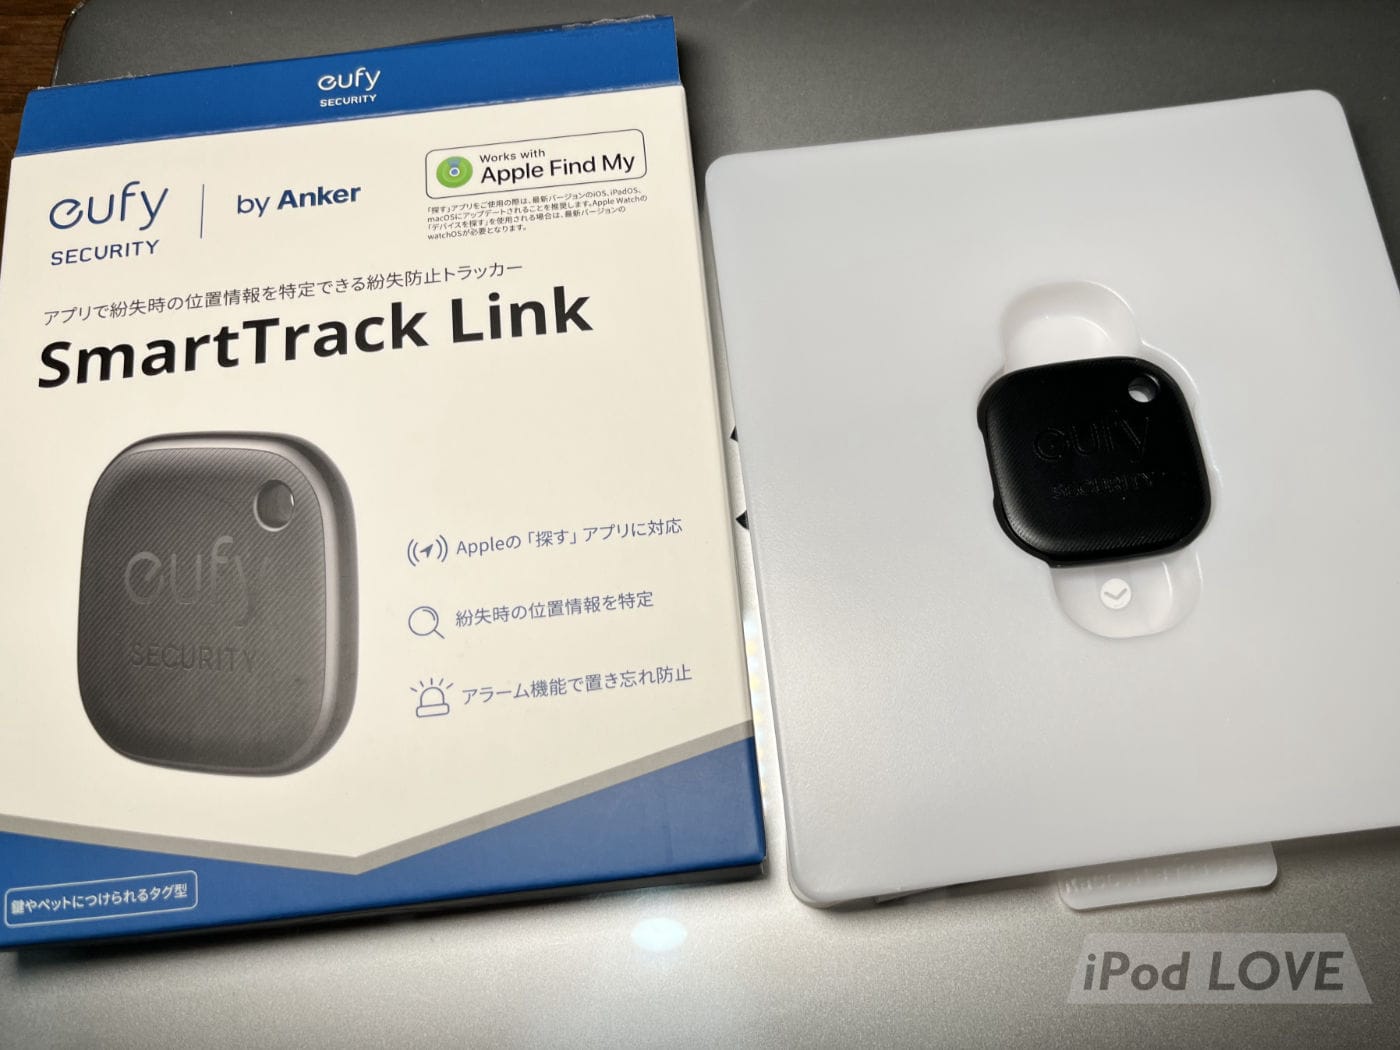 Anker SmartTrackLink 3rdparty AirTags 12